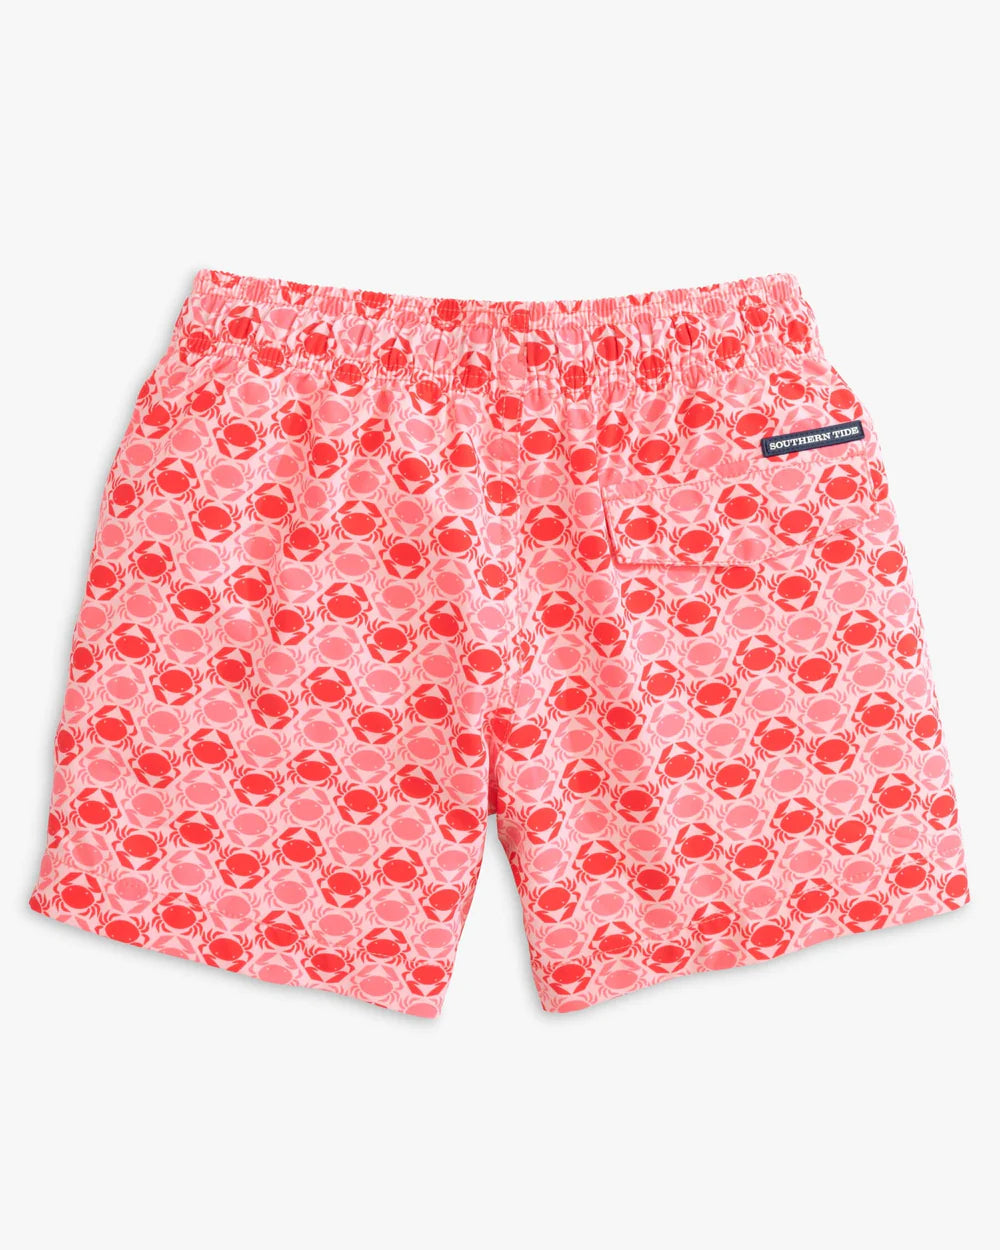 Southern Tide Youth Why So Crabby Printed Swim Trunk